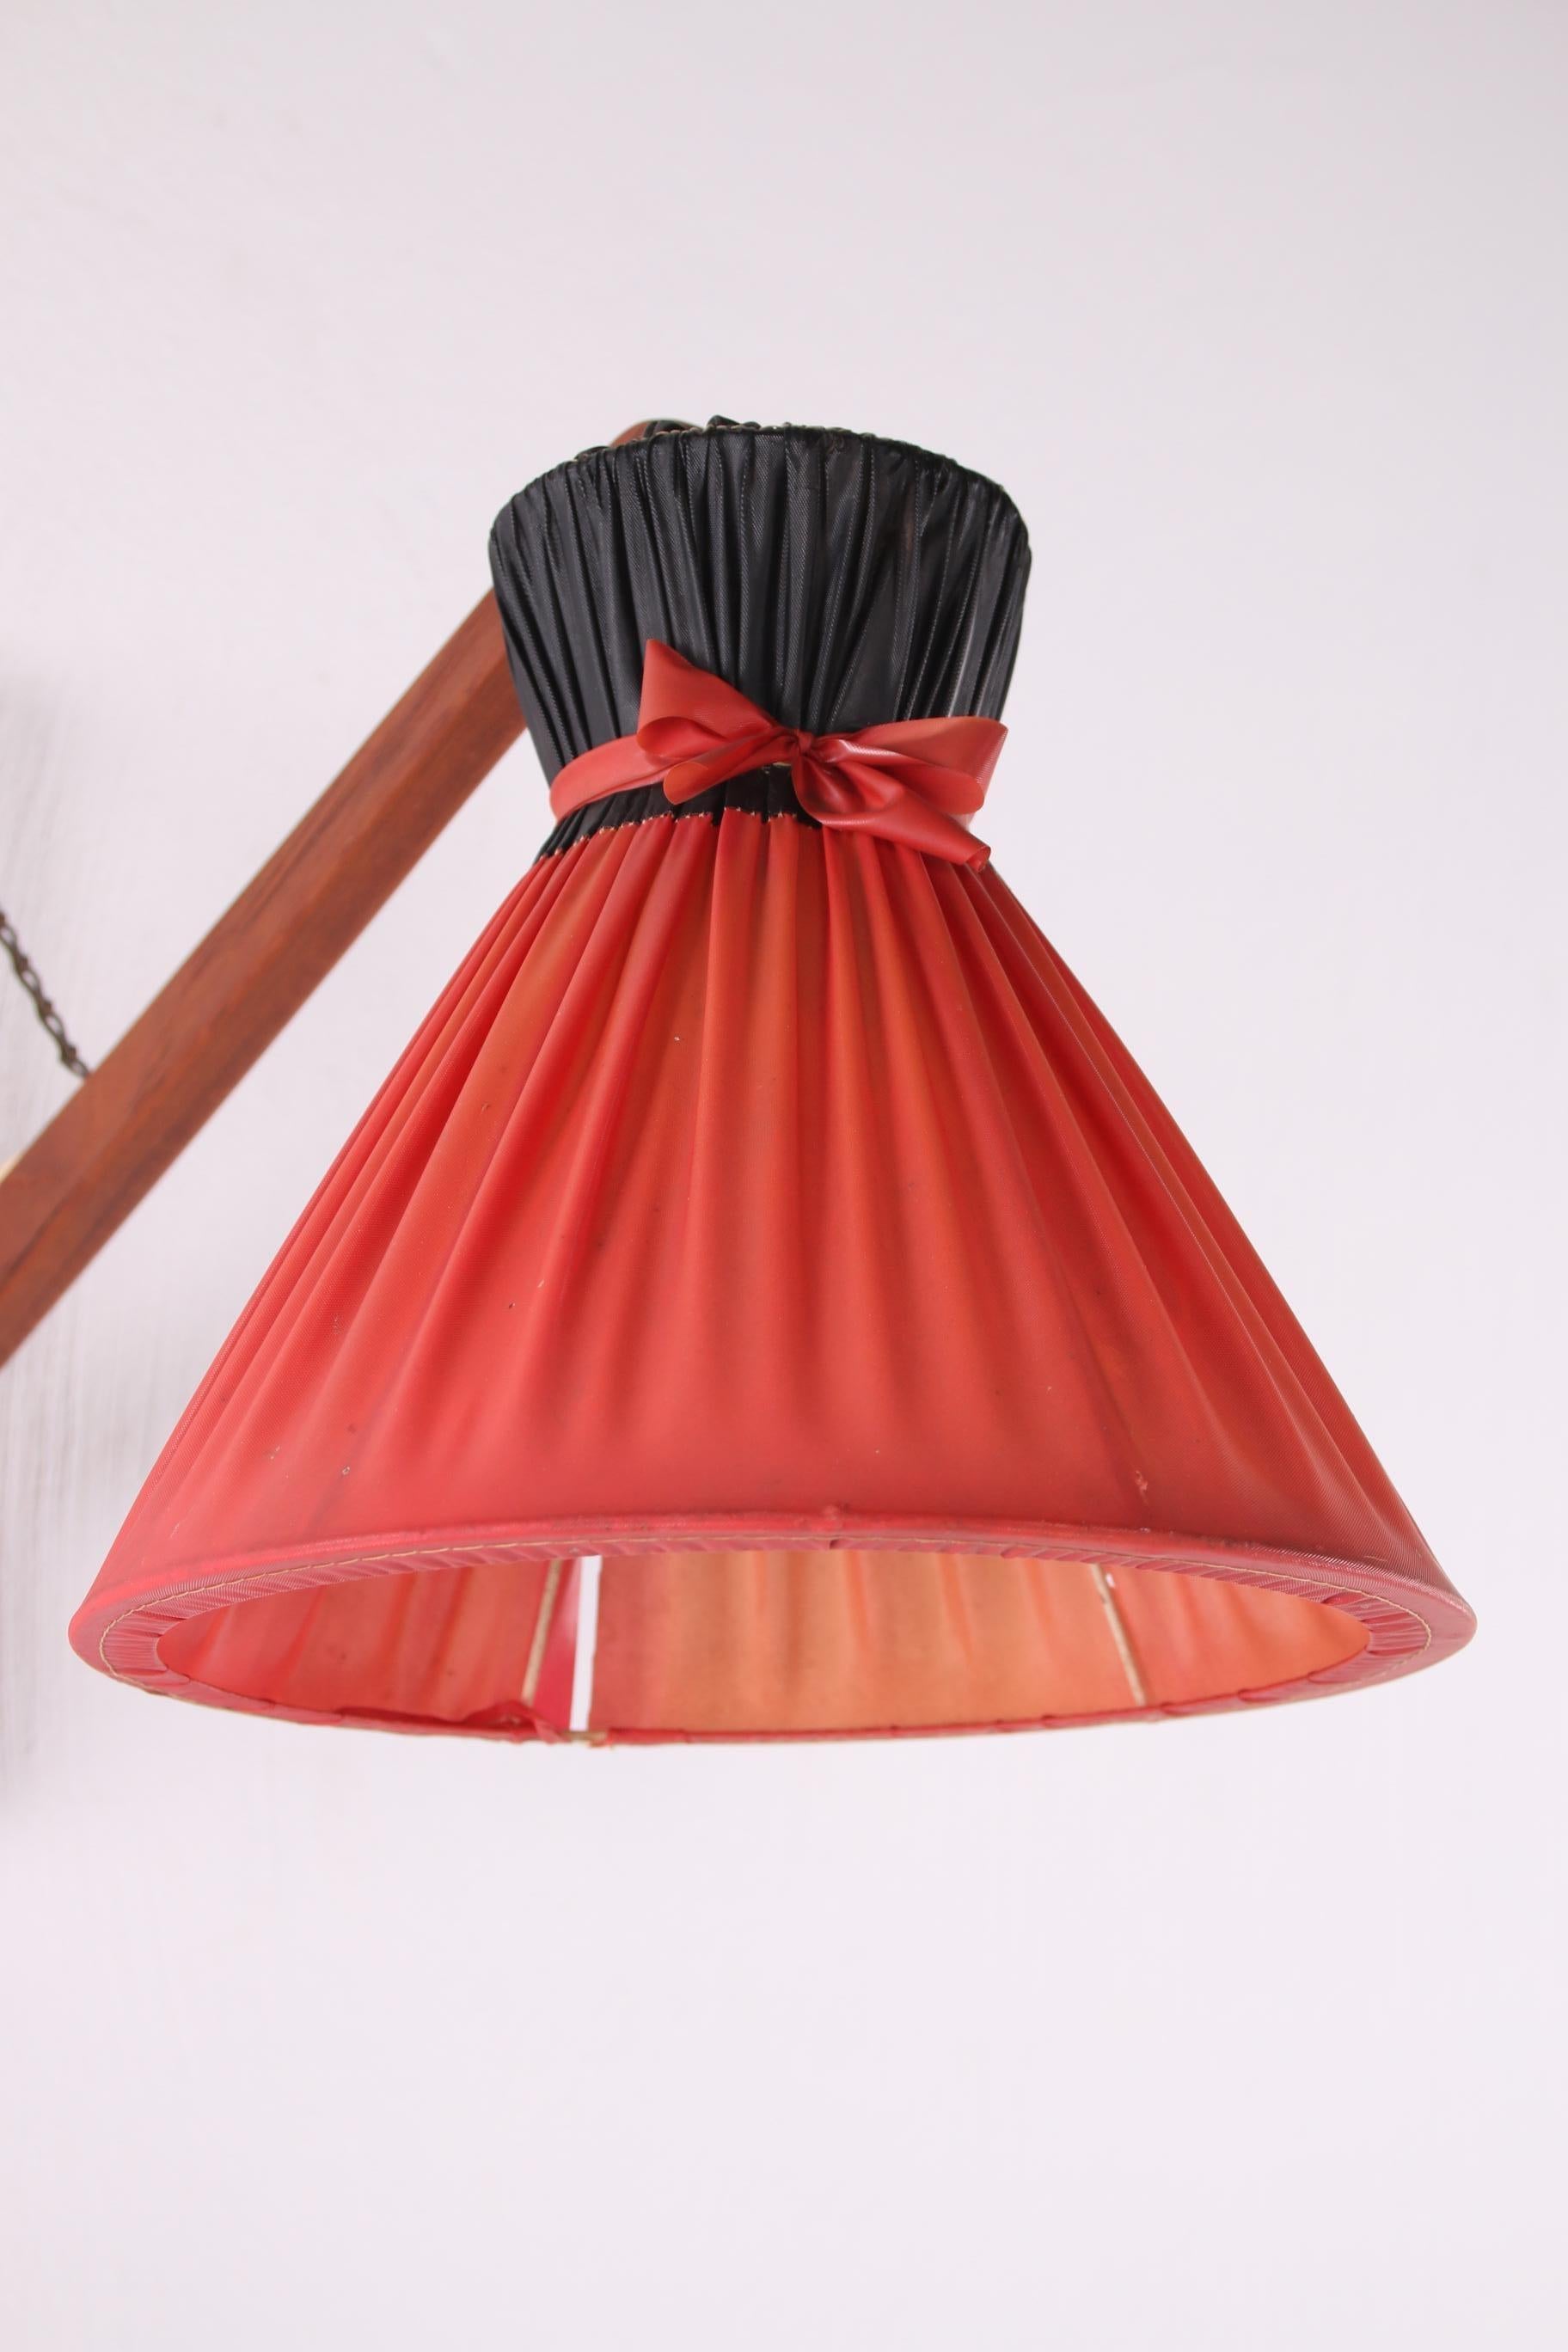 Danish Design Wall Lamp with Original Shade, 1960s For Sale 3